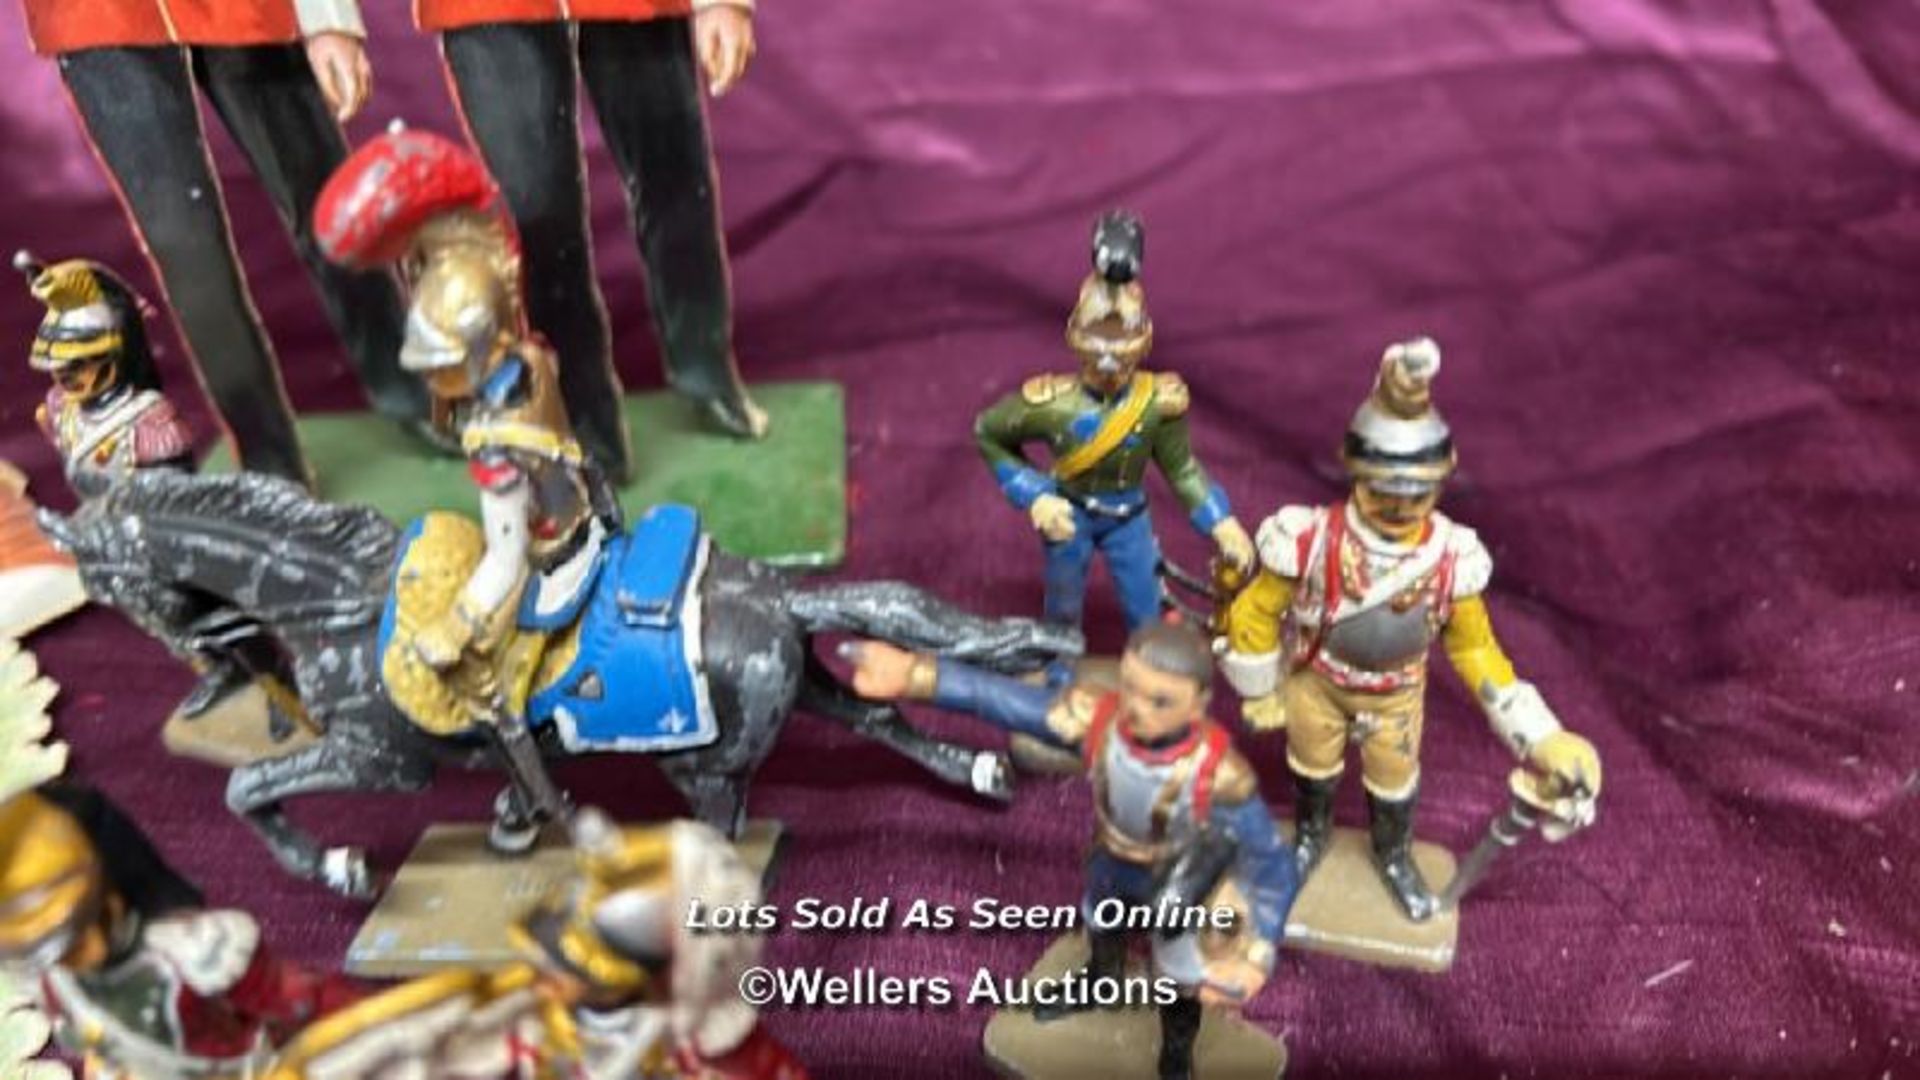 COLLECTION OF 19TH CENTURY PAPER DECOUPAGE SOLDIERS AND SEVEN FRENCH DRAGOON LEAD SOLDIERS - Image 6 of 6